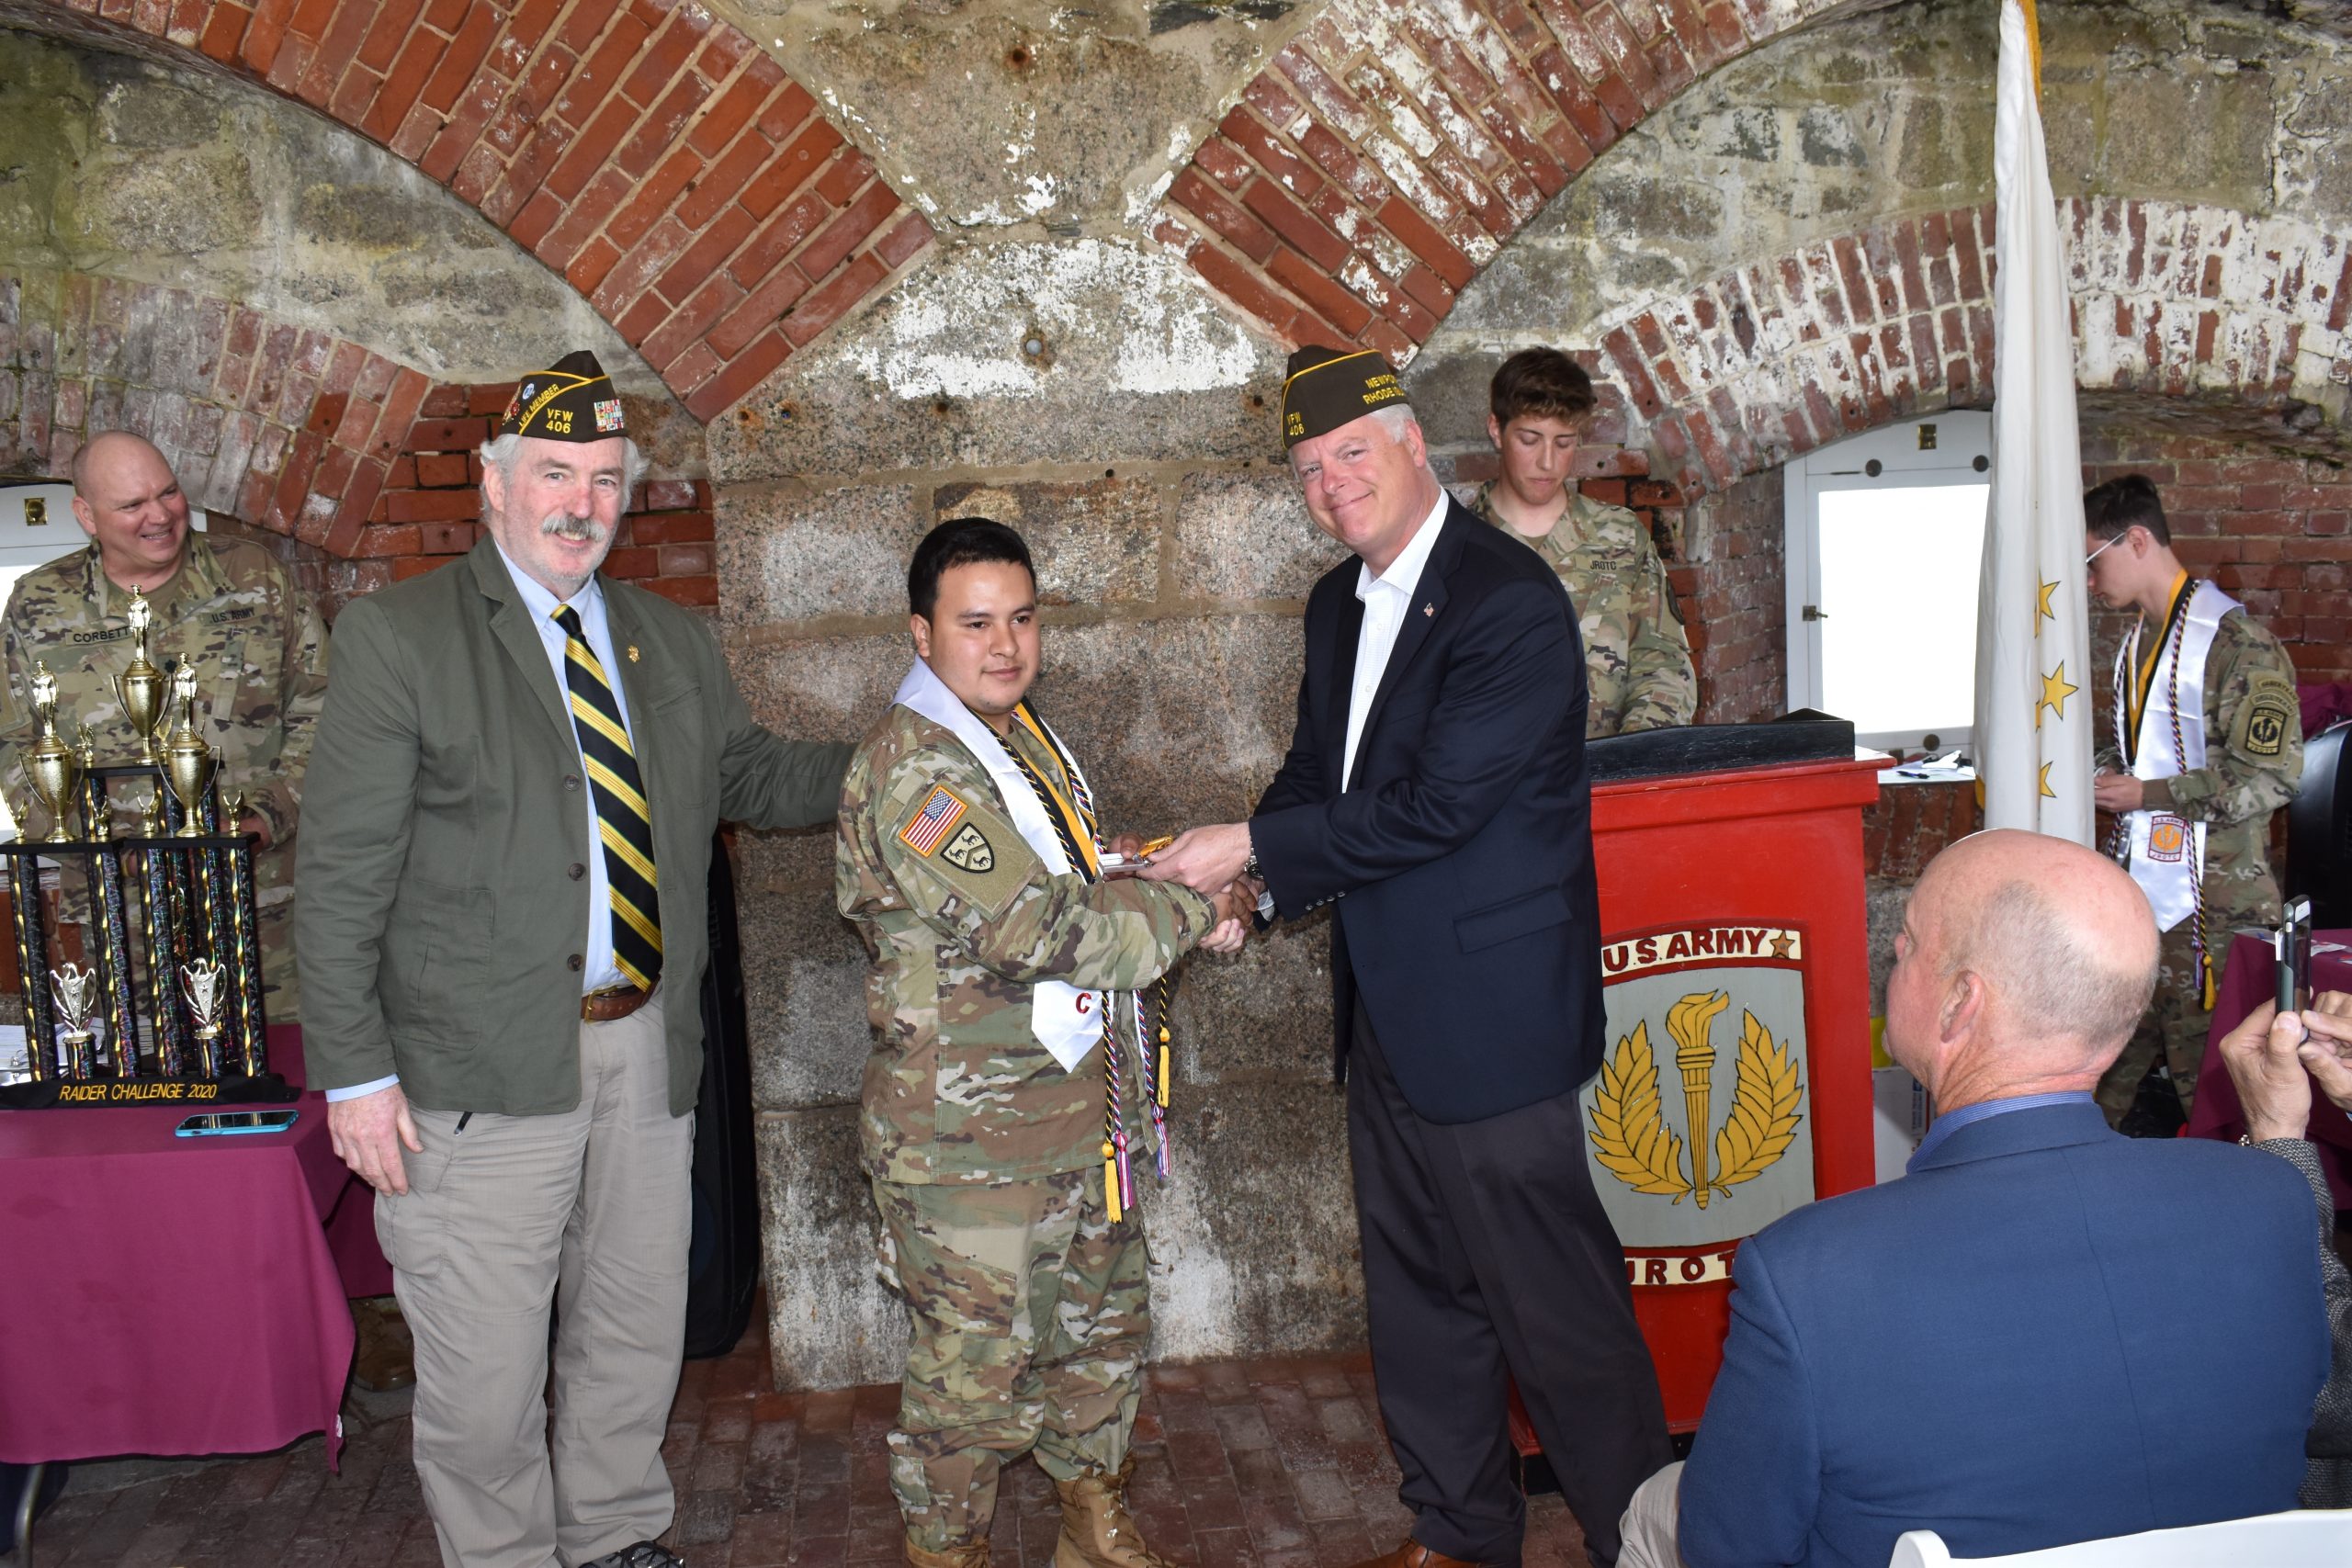 SFC Farrell and CAPT Turn presenting Cadet Garcia Munoz a medal and certificate for outstanding achievement.